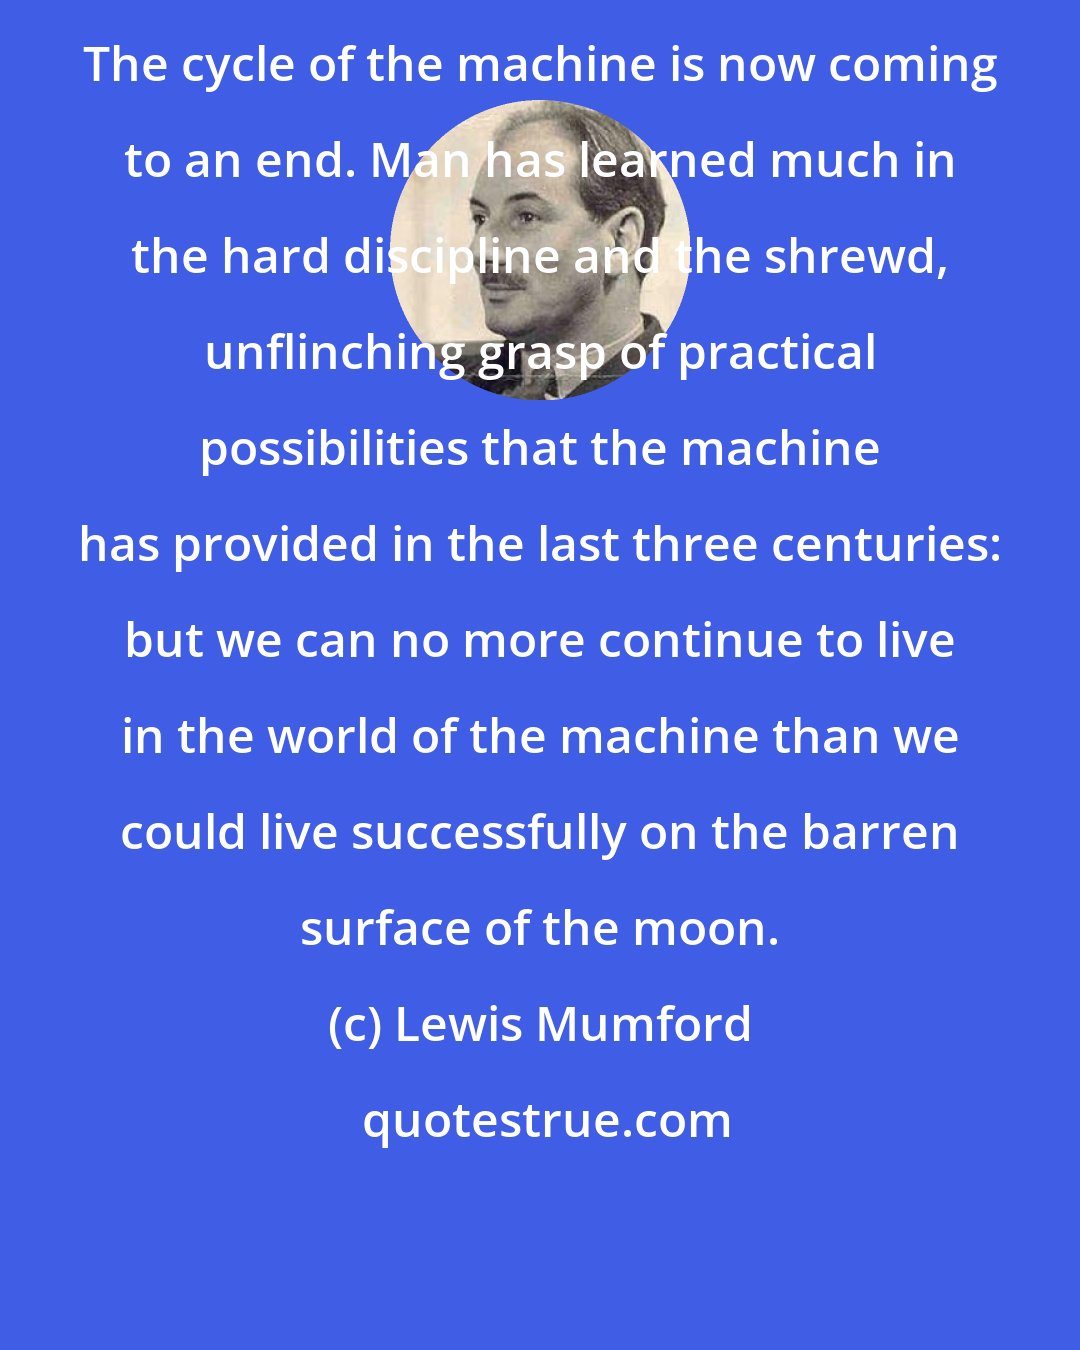 Lewis Mumford: The cycle of the machine is now coming to an end. Man has learned much in the hard discipline and the shrewd, unflinching grasp of practical possibilities that the machine has provided in the last three centuries: but we can no more continue to live in the world of the machine than we could live successfully on the barren surface of the moon.